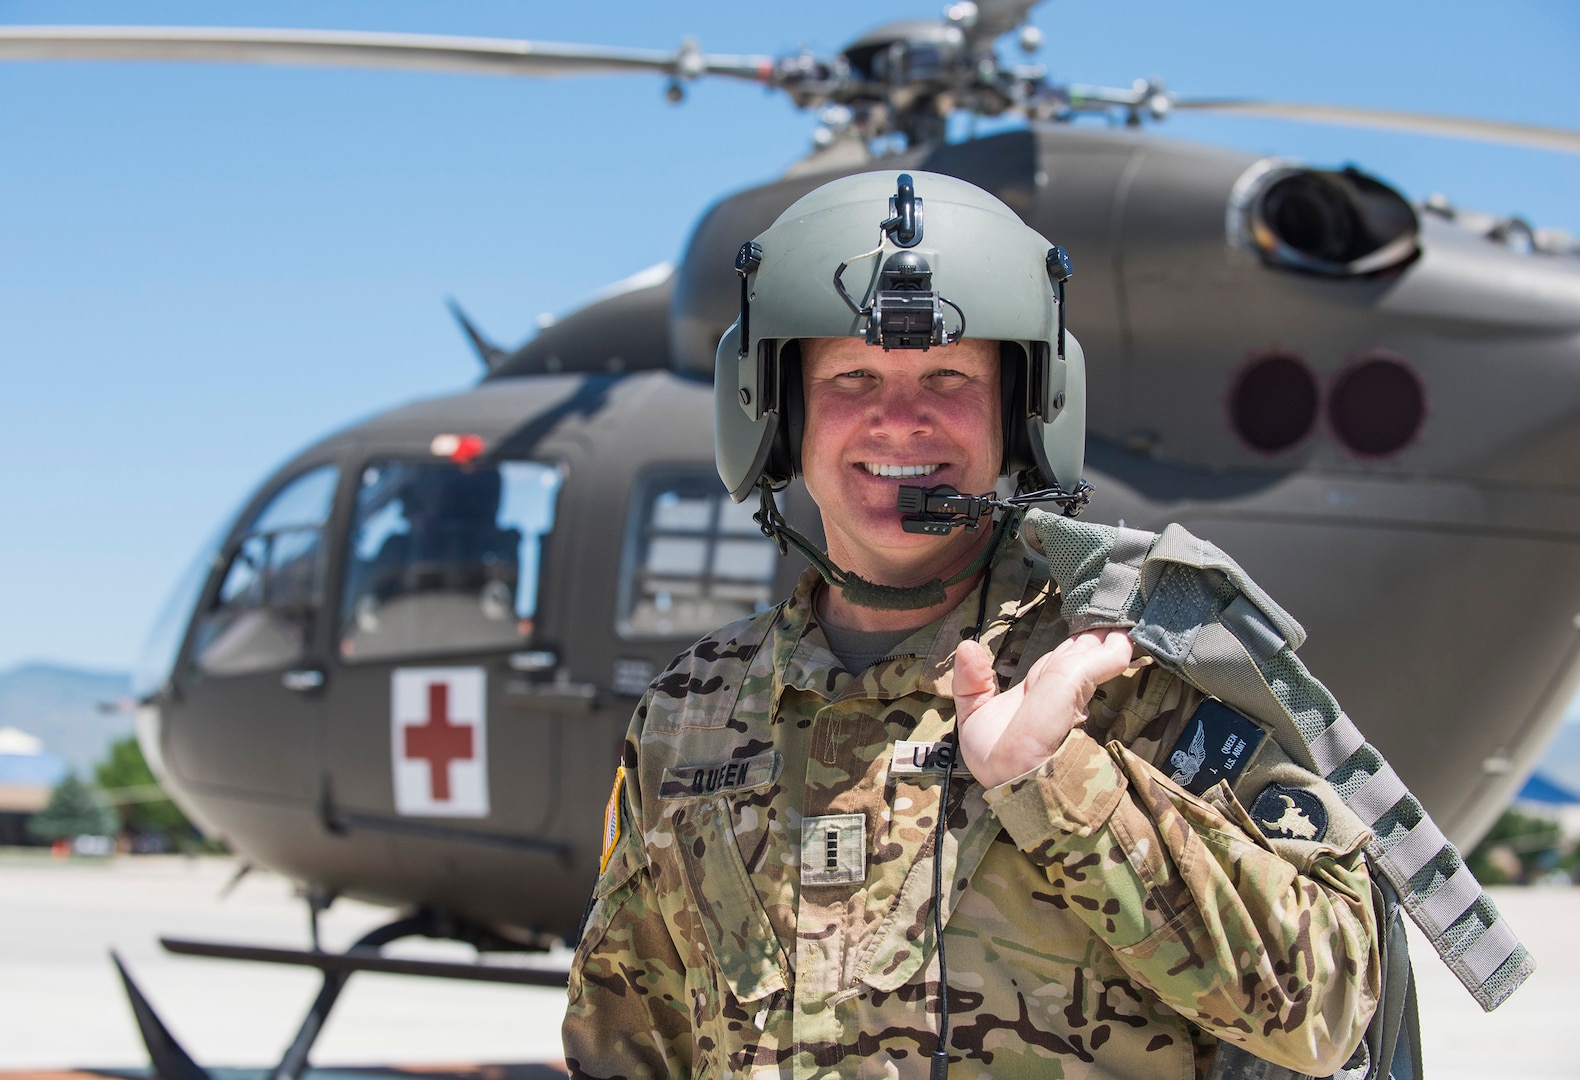 Spend a day with Idaho farmer and Guardsman Chief Warrant Officer 4 Chad Queen, one of the Idaho Army National Guard's rescue helicopter pilots, and feel firsthand what it is like to fly the UH-72 Lakota helicopter and help save lives.